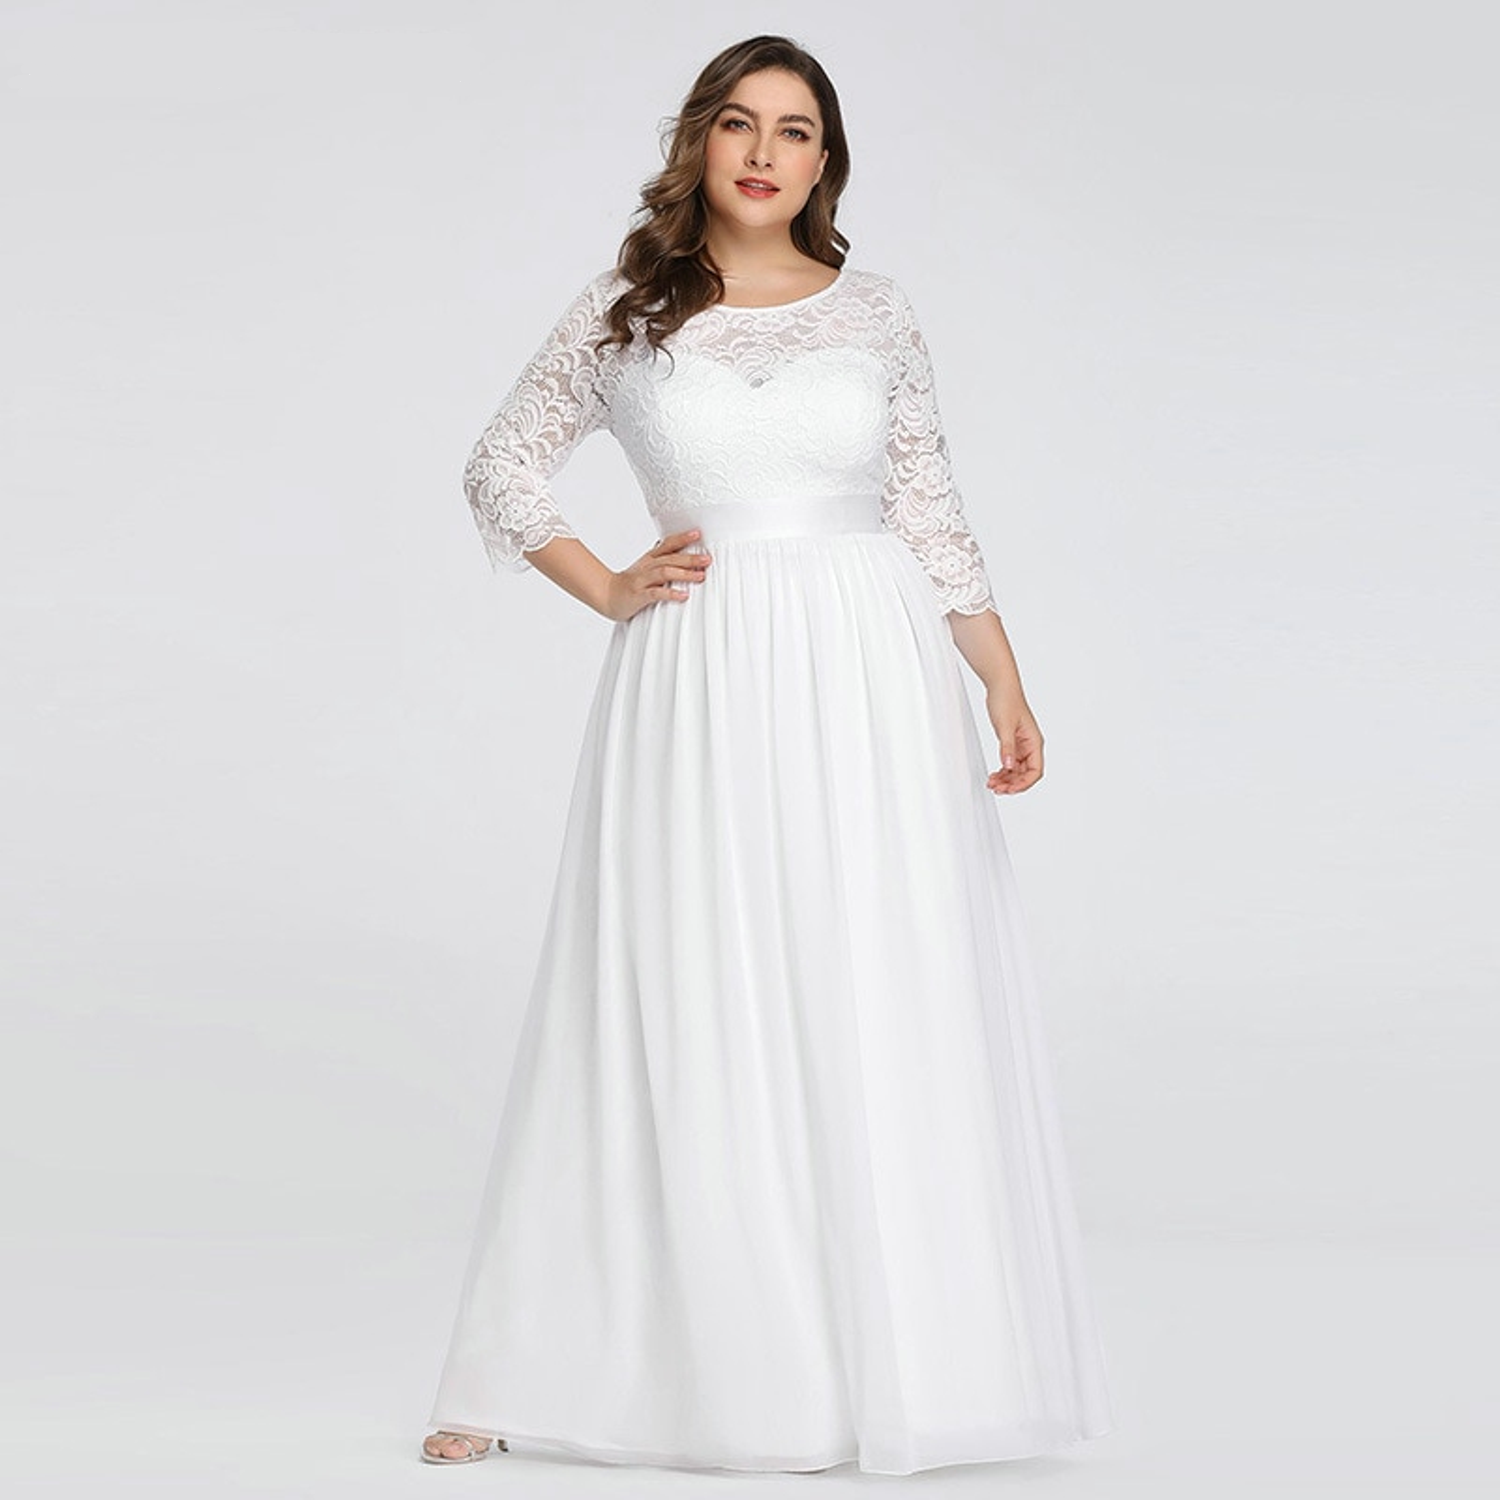 Empire waist wedding dress with lace